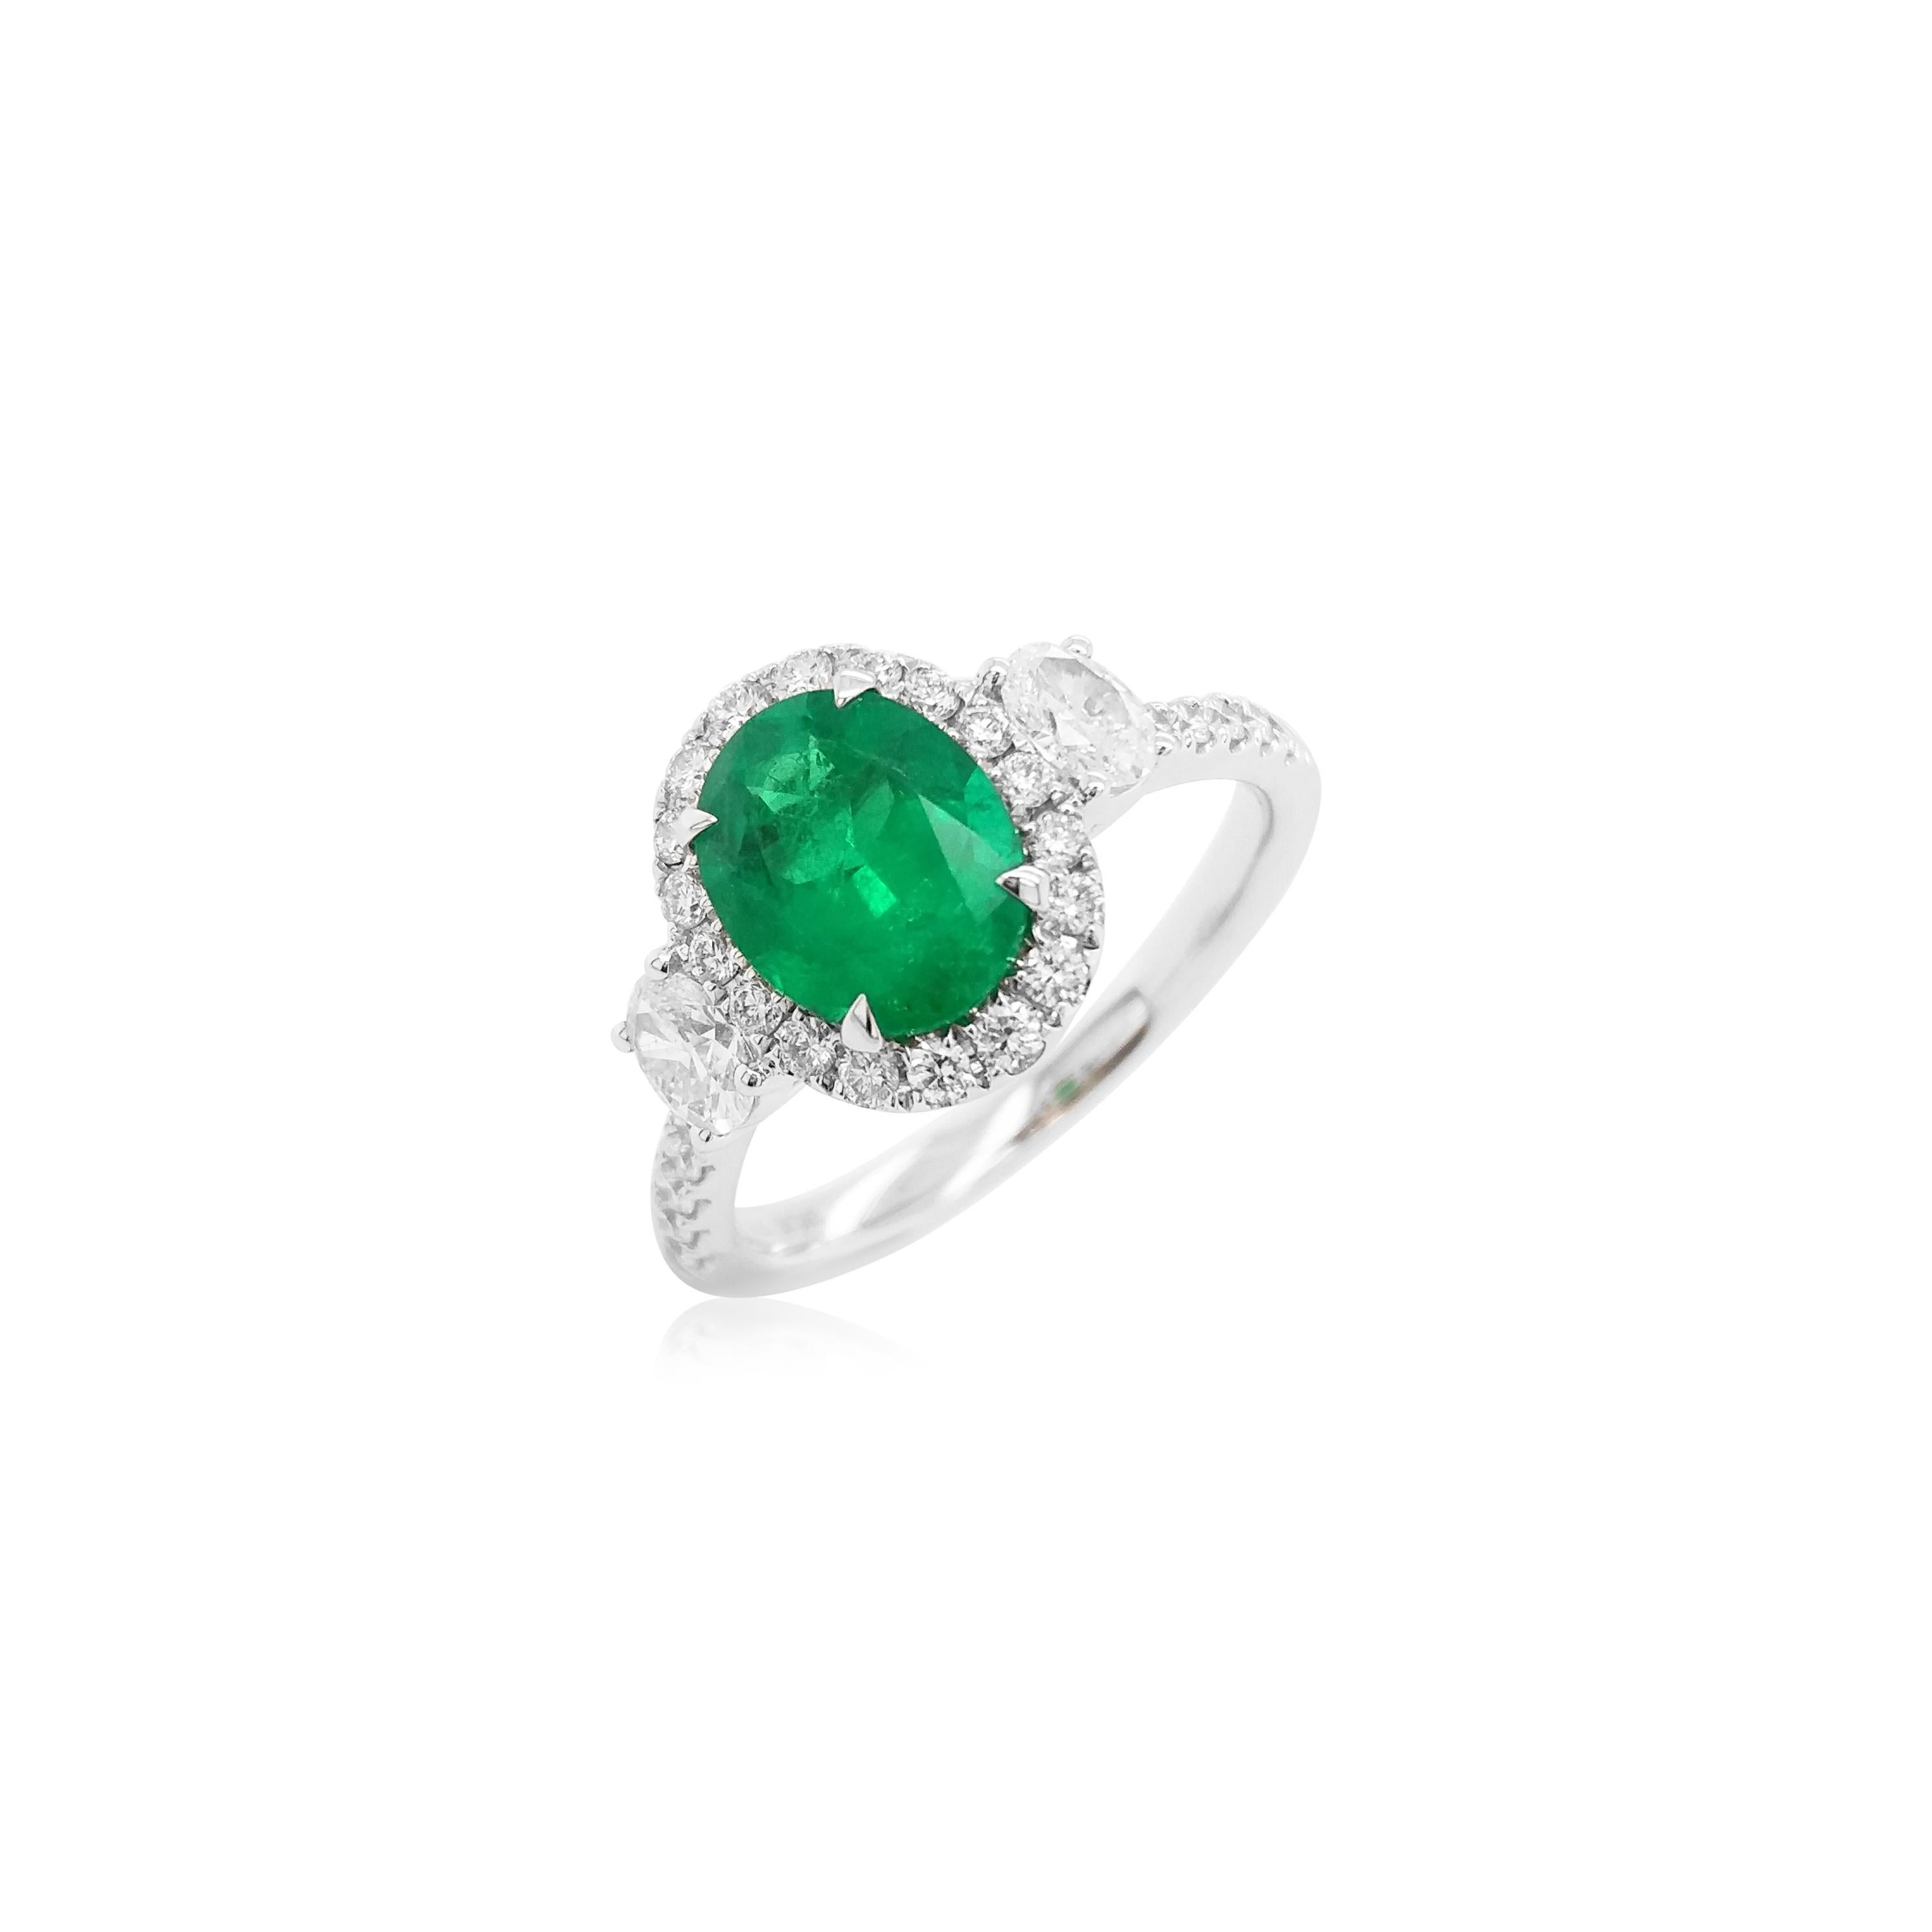 Oval Cut Certified Colombian Emerald White Diamond 18K Gold Wedding Ring For Sale